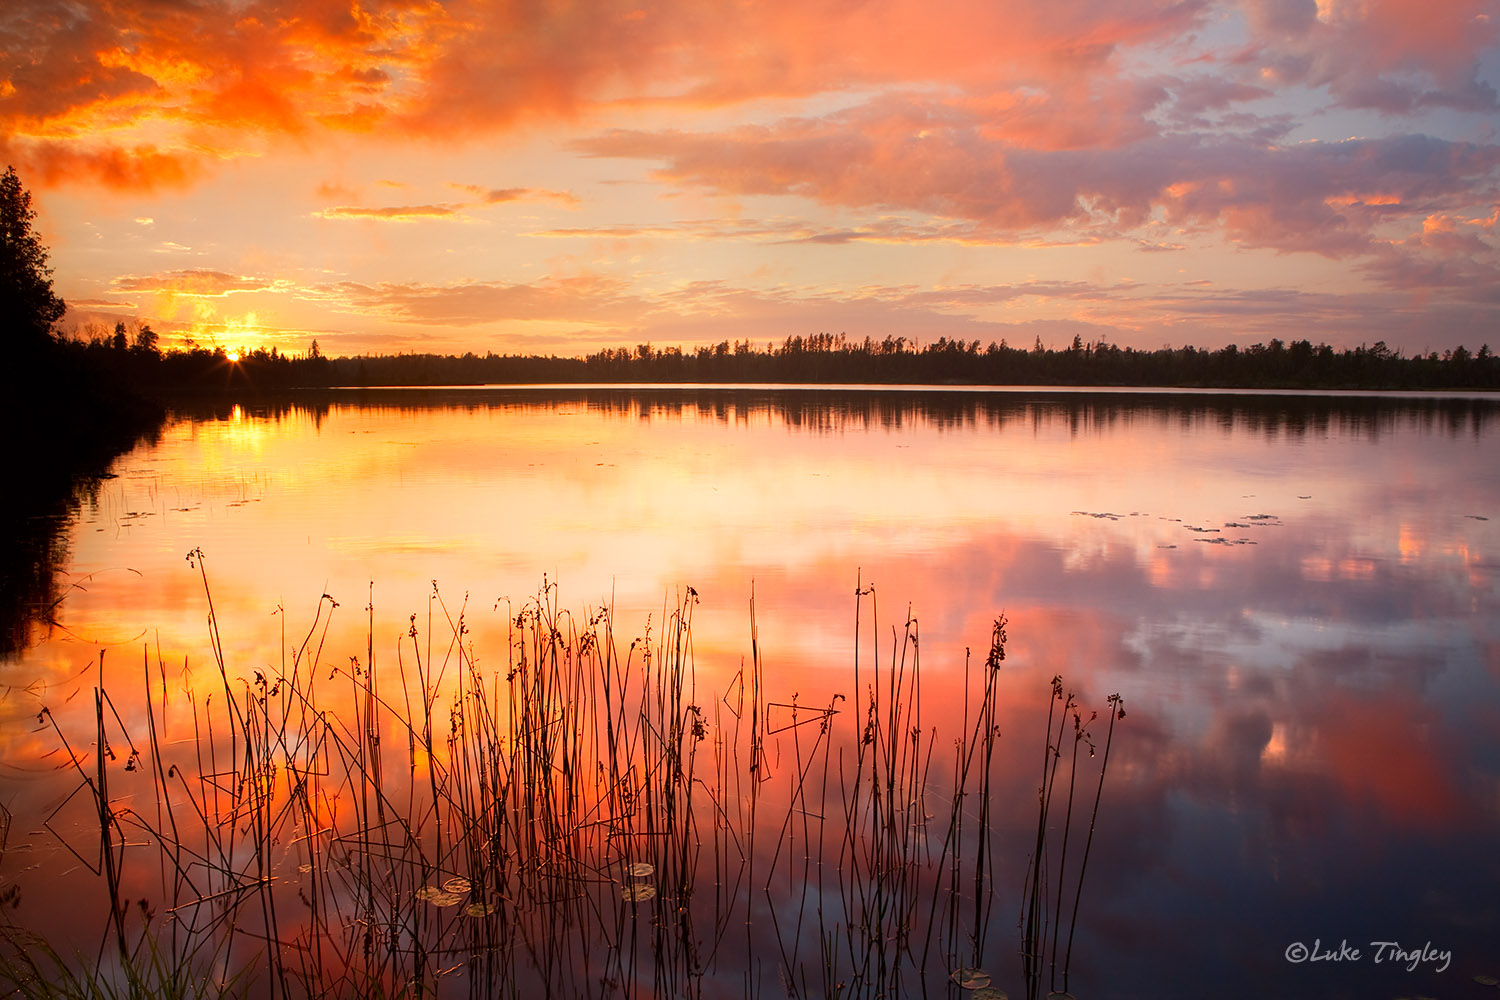 Northern Minnesota, Backcountry, Lake, sunset, reeds, reflection, united states, midwest, north woods, MN